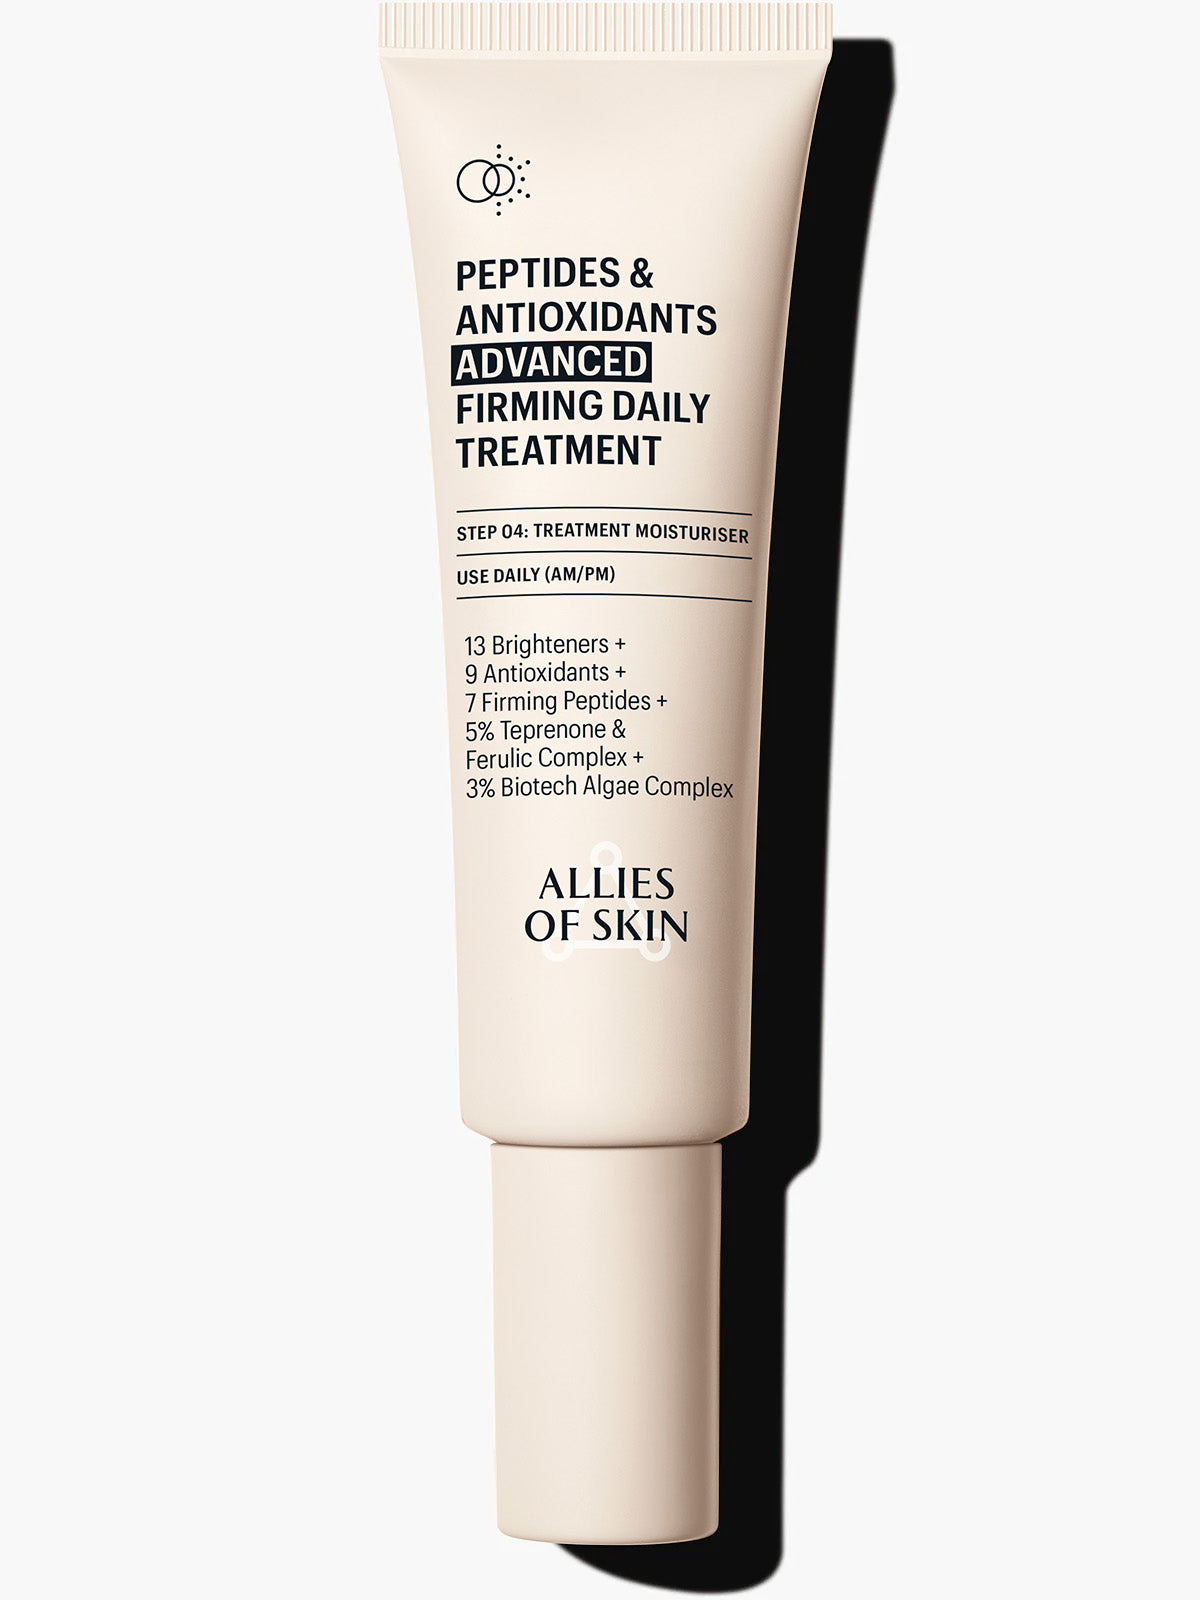 Peptides & Antioxidants Advanced Firming Daily Treatment